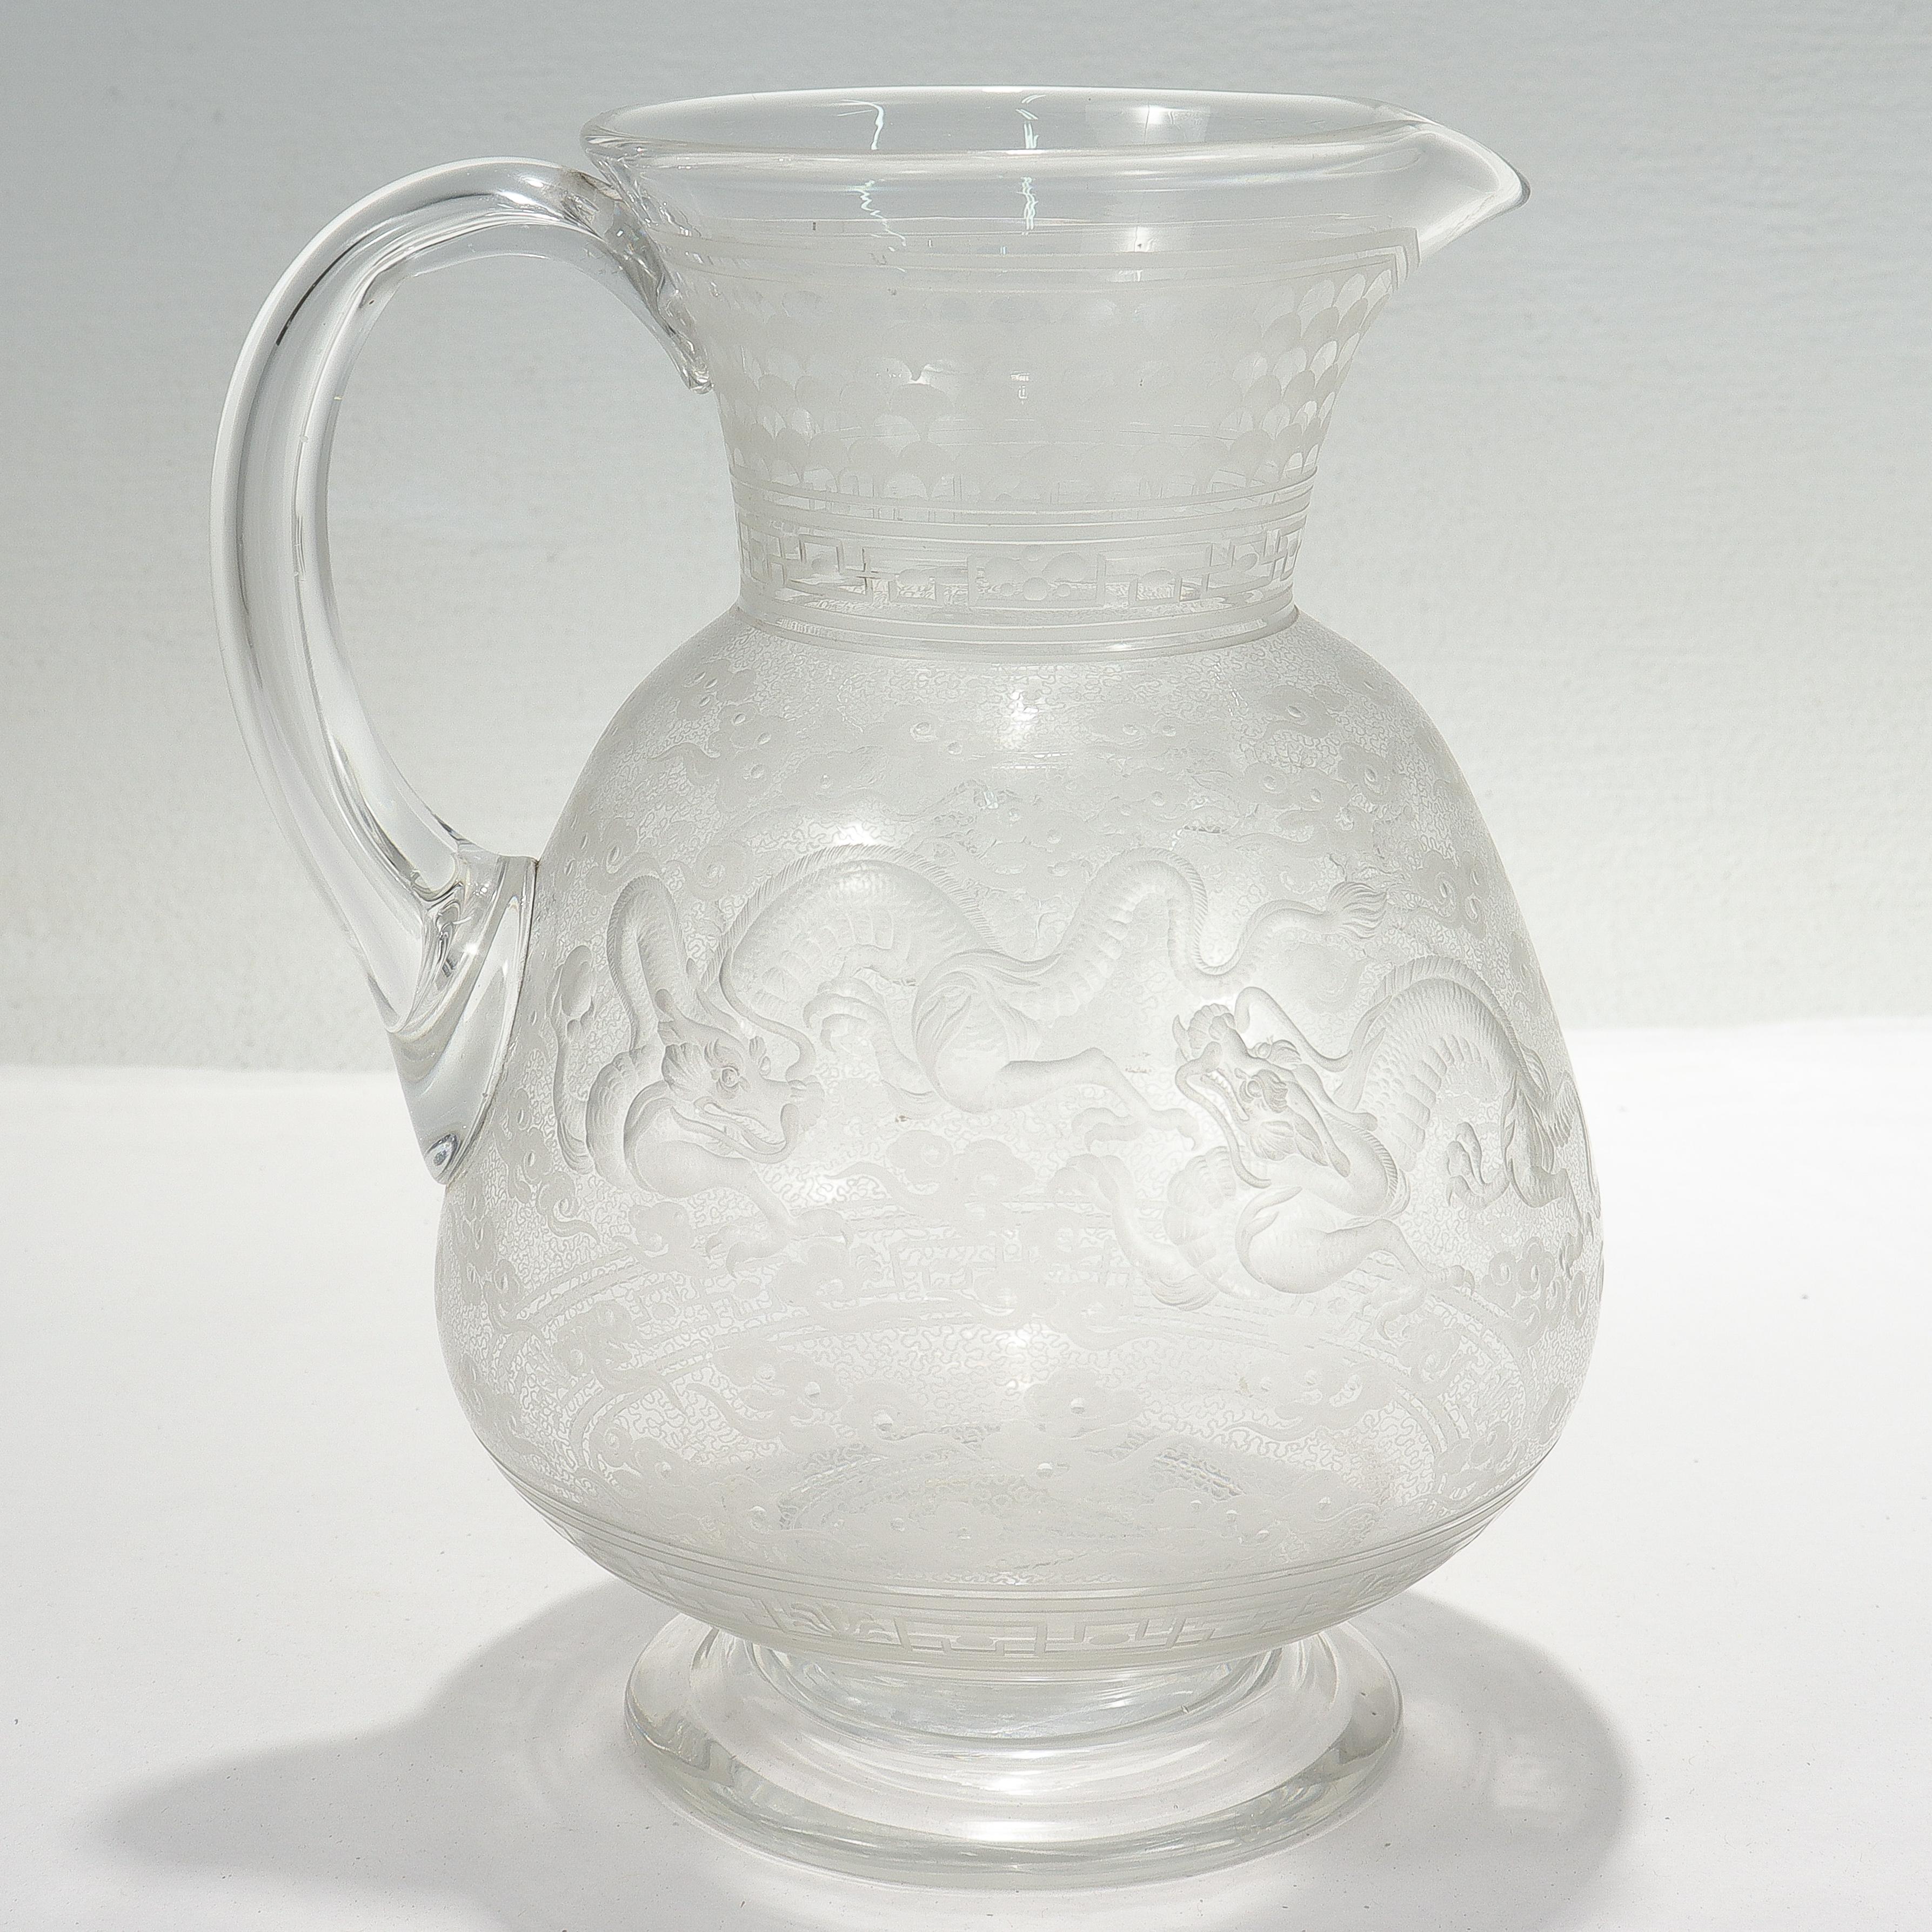 A fine antique etched & engraved glass water pitcher.

Attributed to Frederick Kny and Webb.

Each side with engraved & etched designs of 2 Chinese dragons chasing a pearl amongst clouds. 

A possibly related decanter is held in the Victoria and